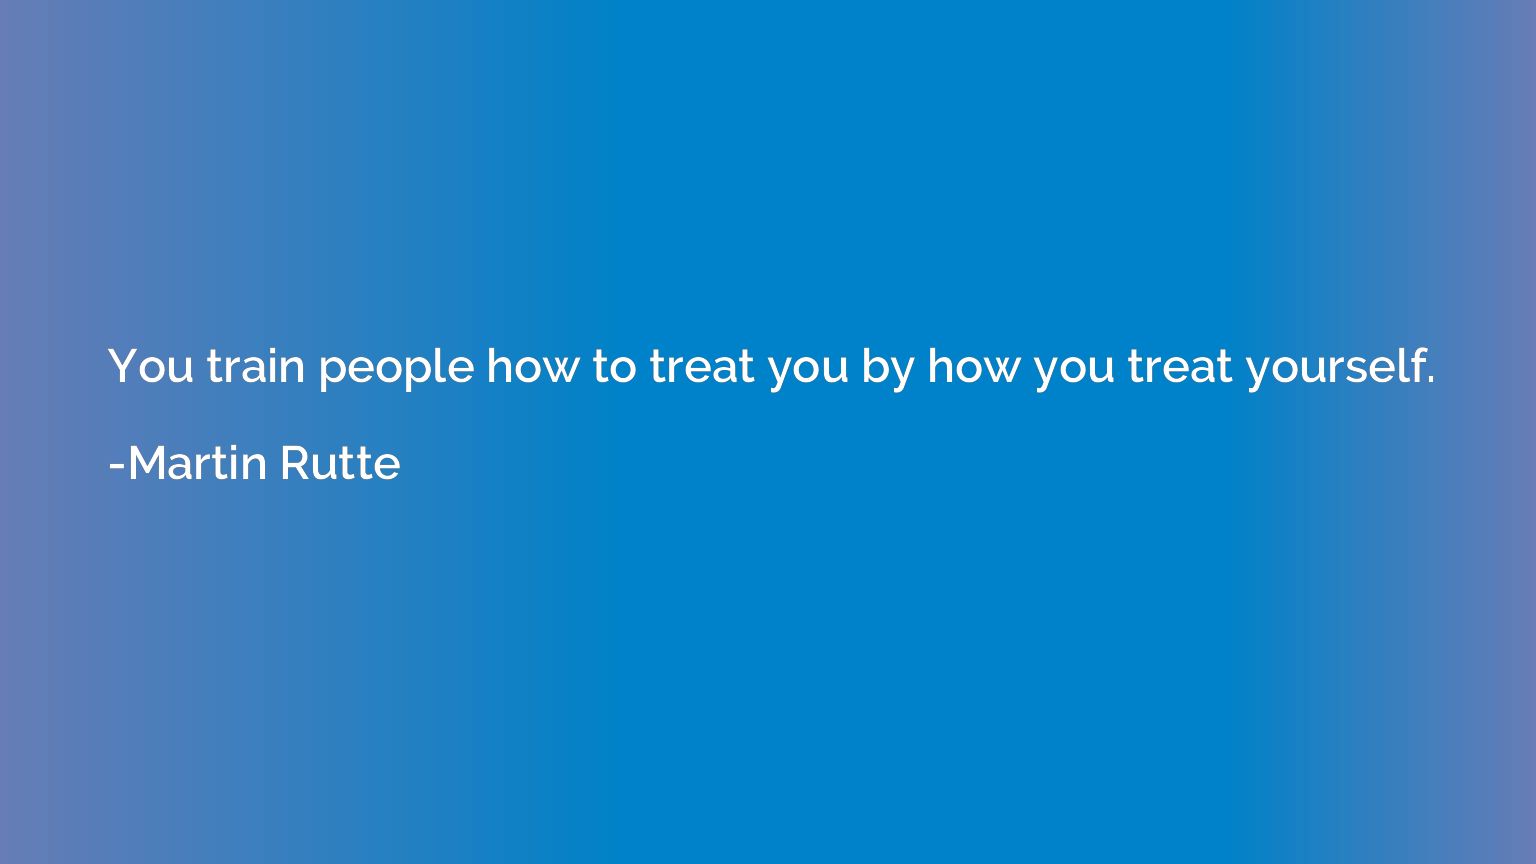 You train people how to treat you by how you treat yourself.